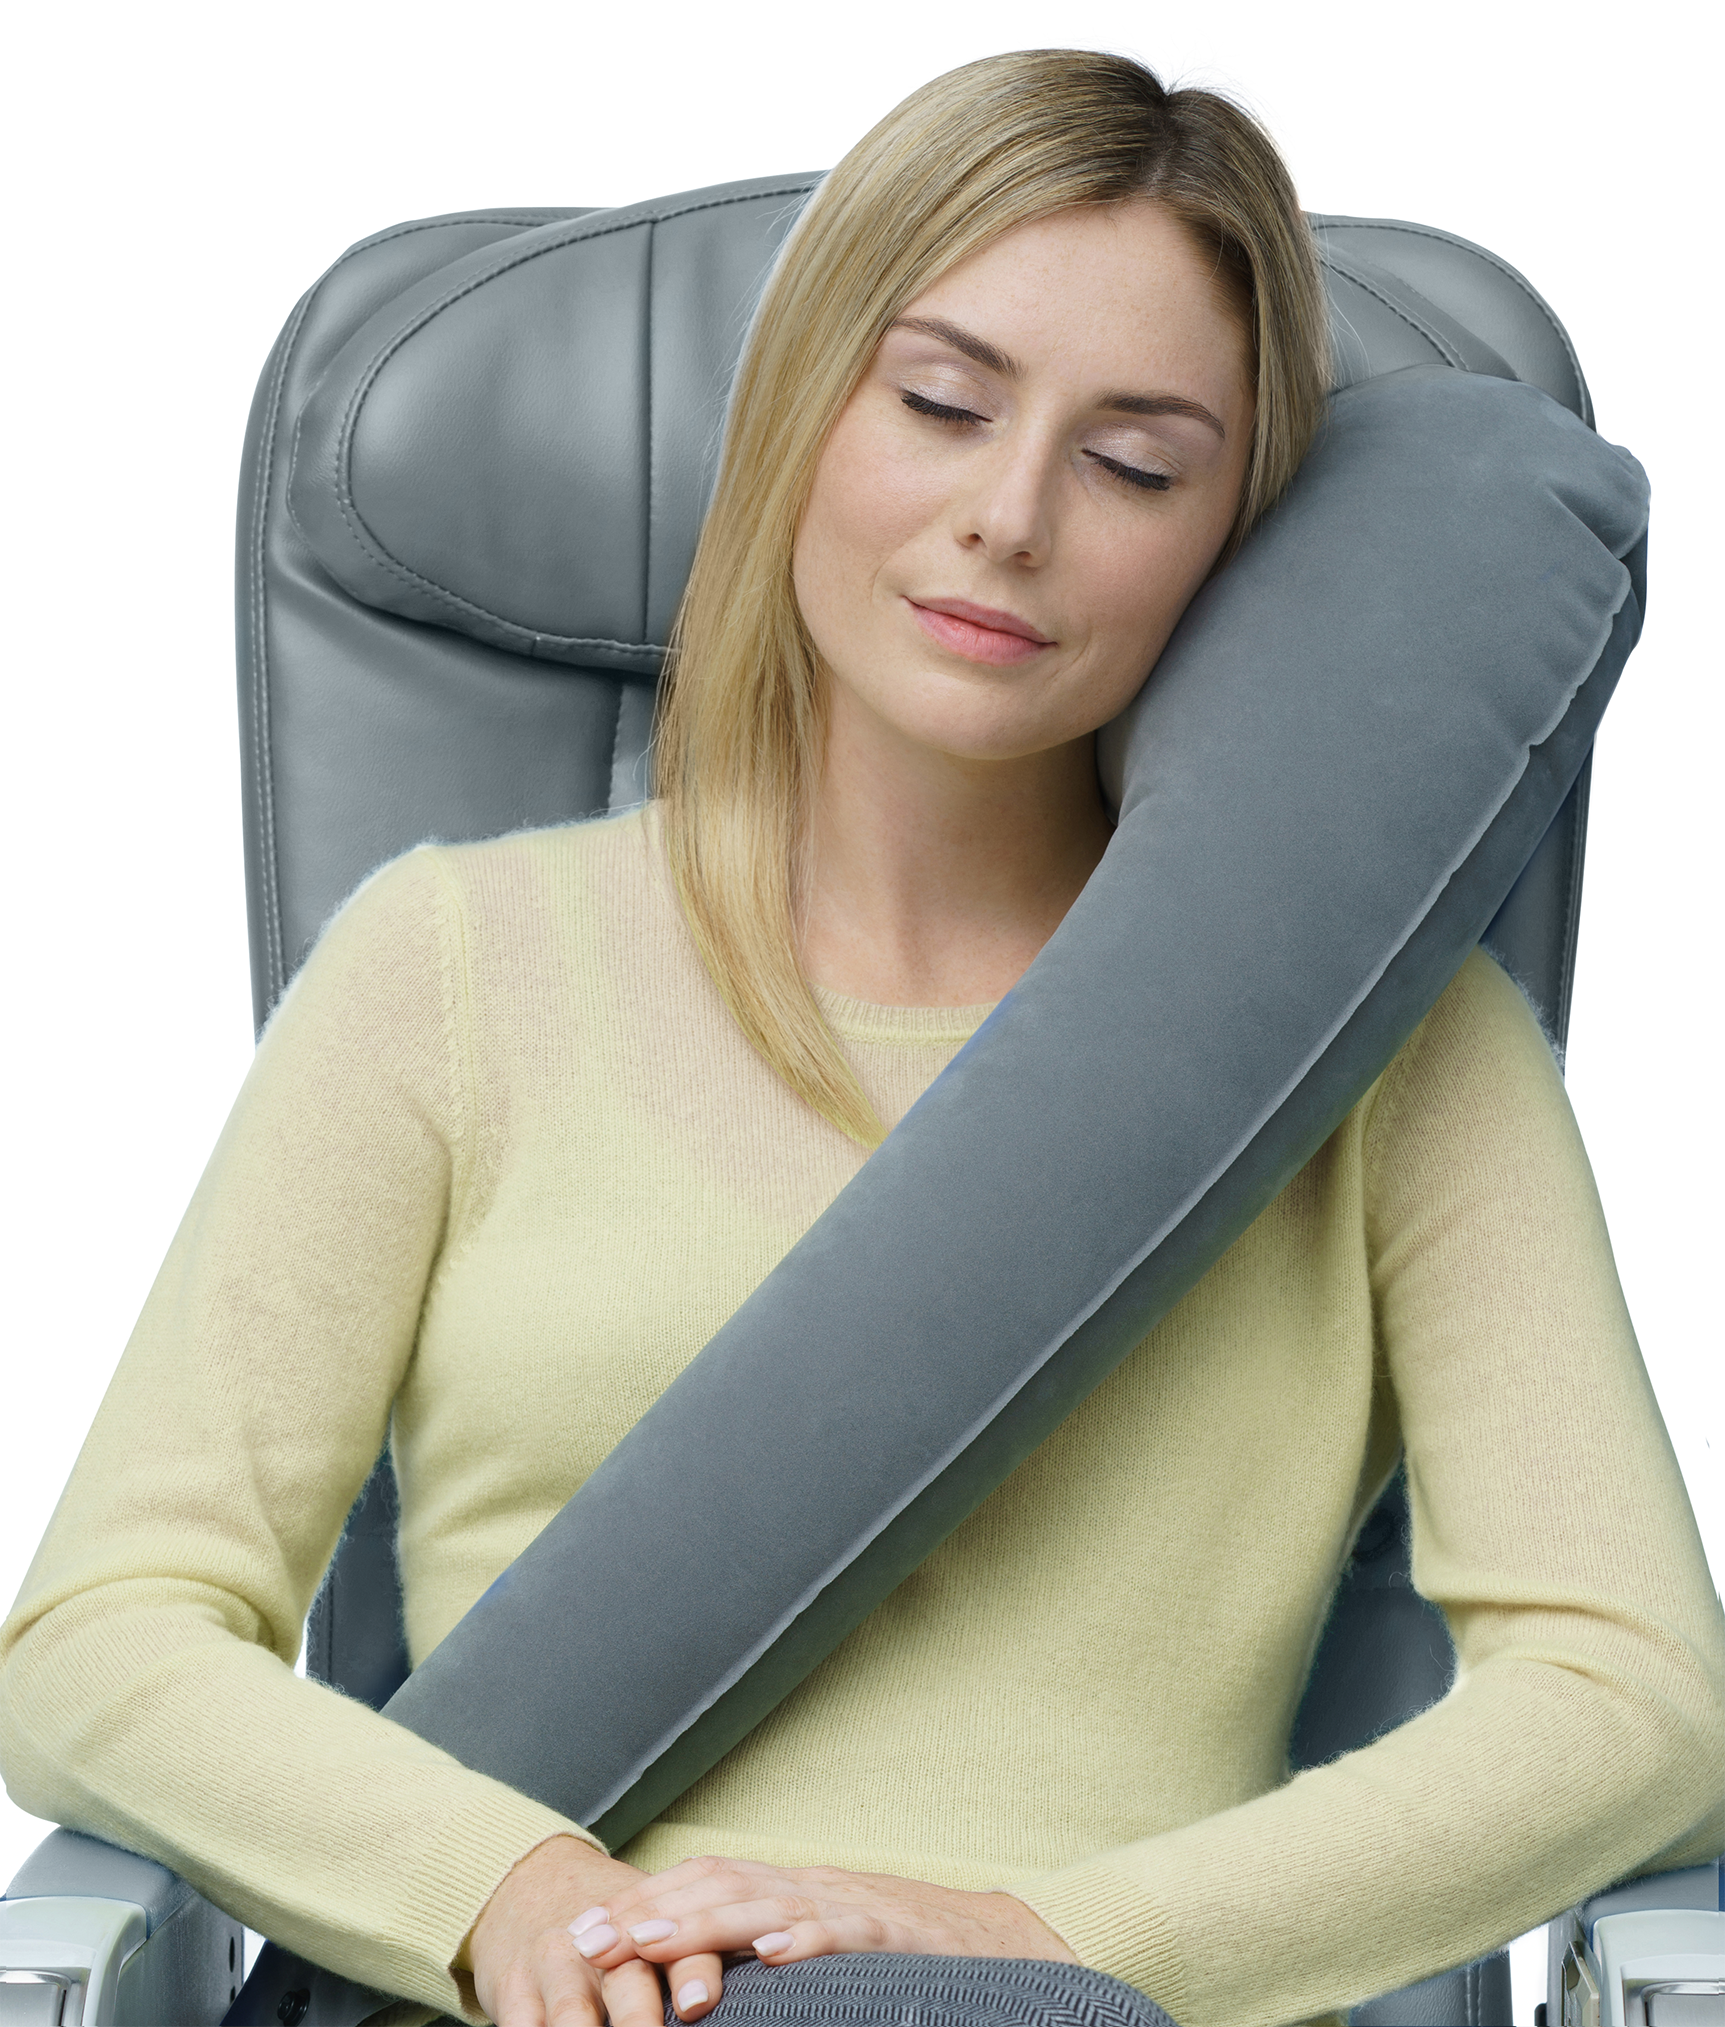 Inflatable Airplane Travel Pillow for Rest and Nap with Neck